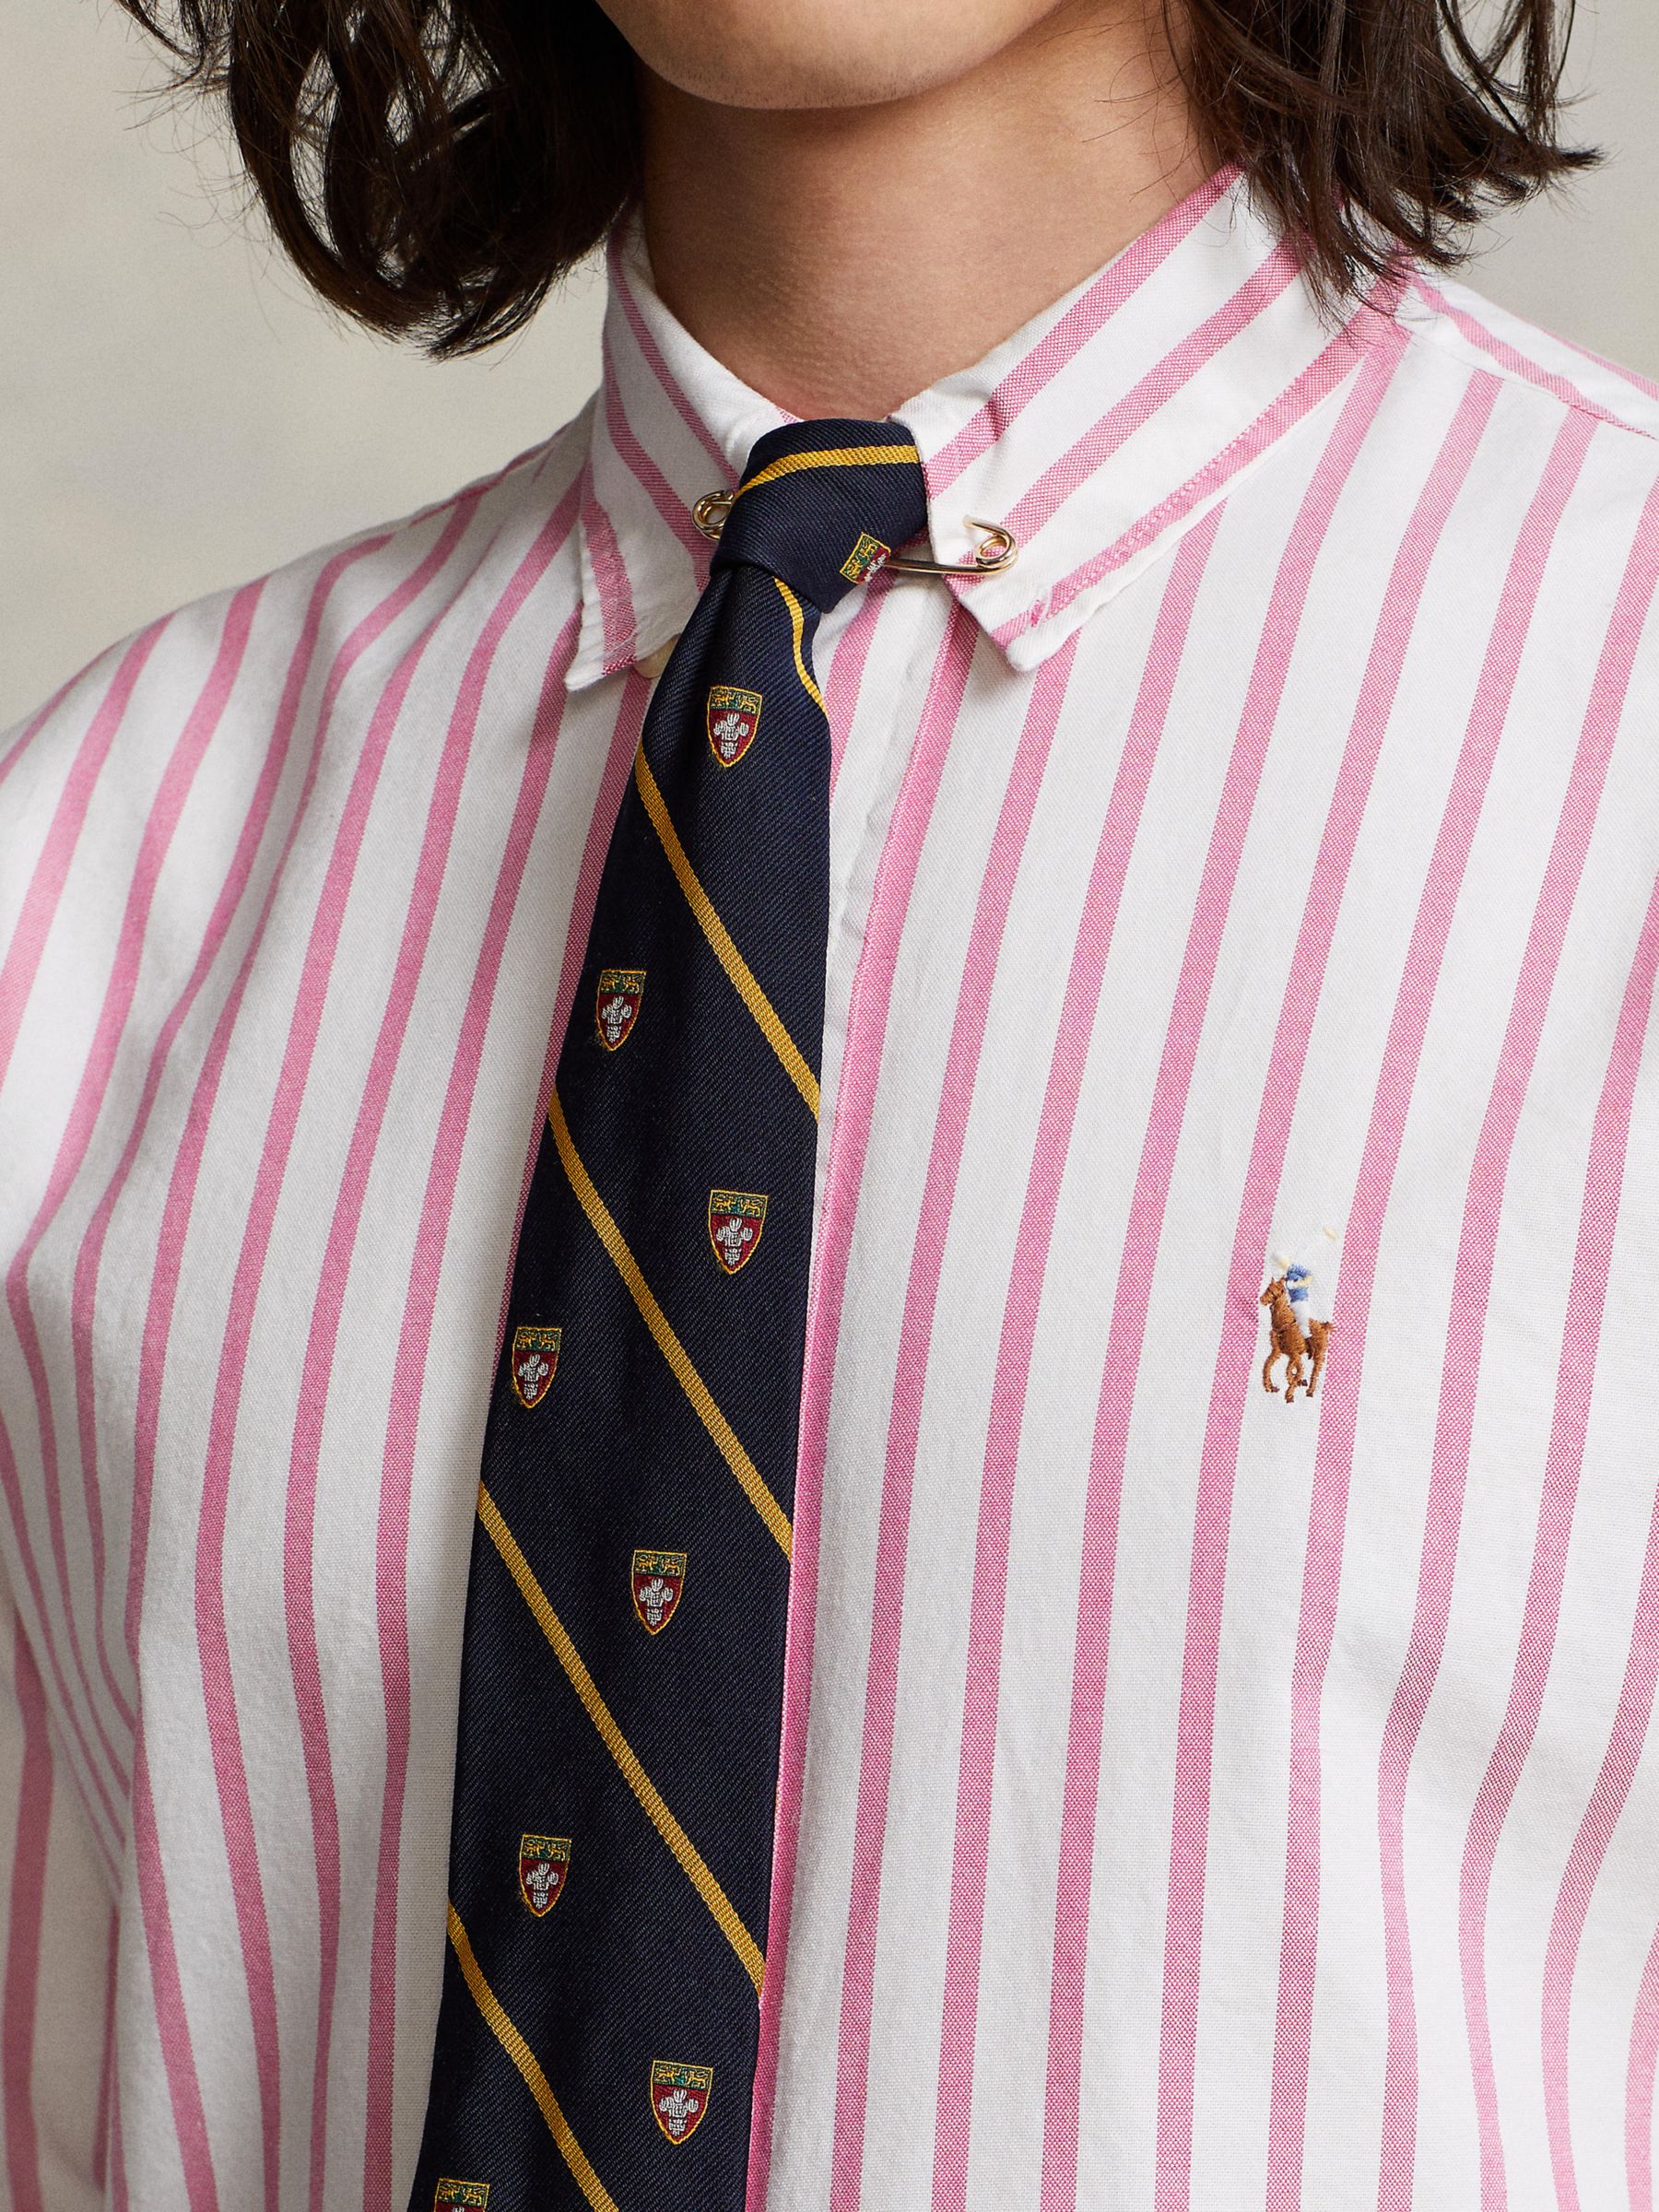 Polo Ralph Lauren Custom Fit Striped Oxford Shirt, Pink/White at